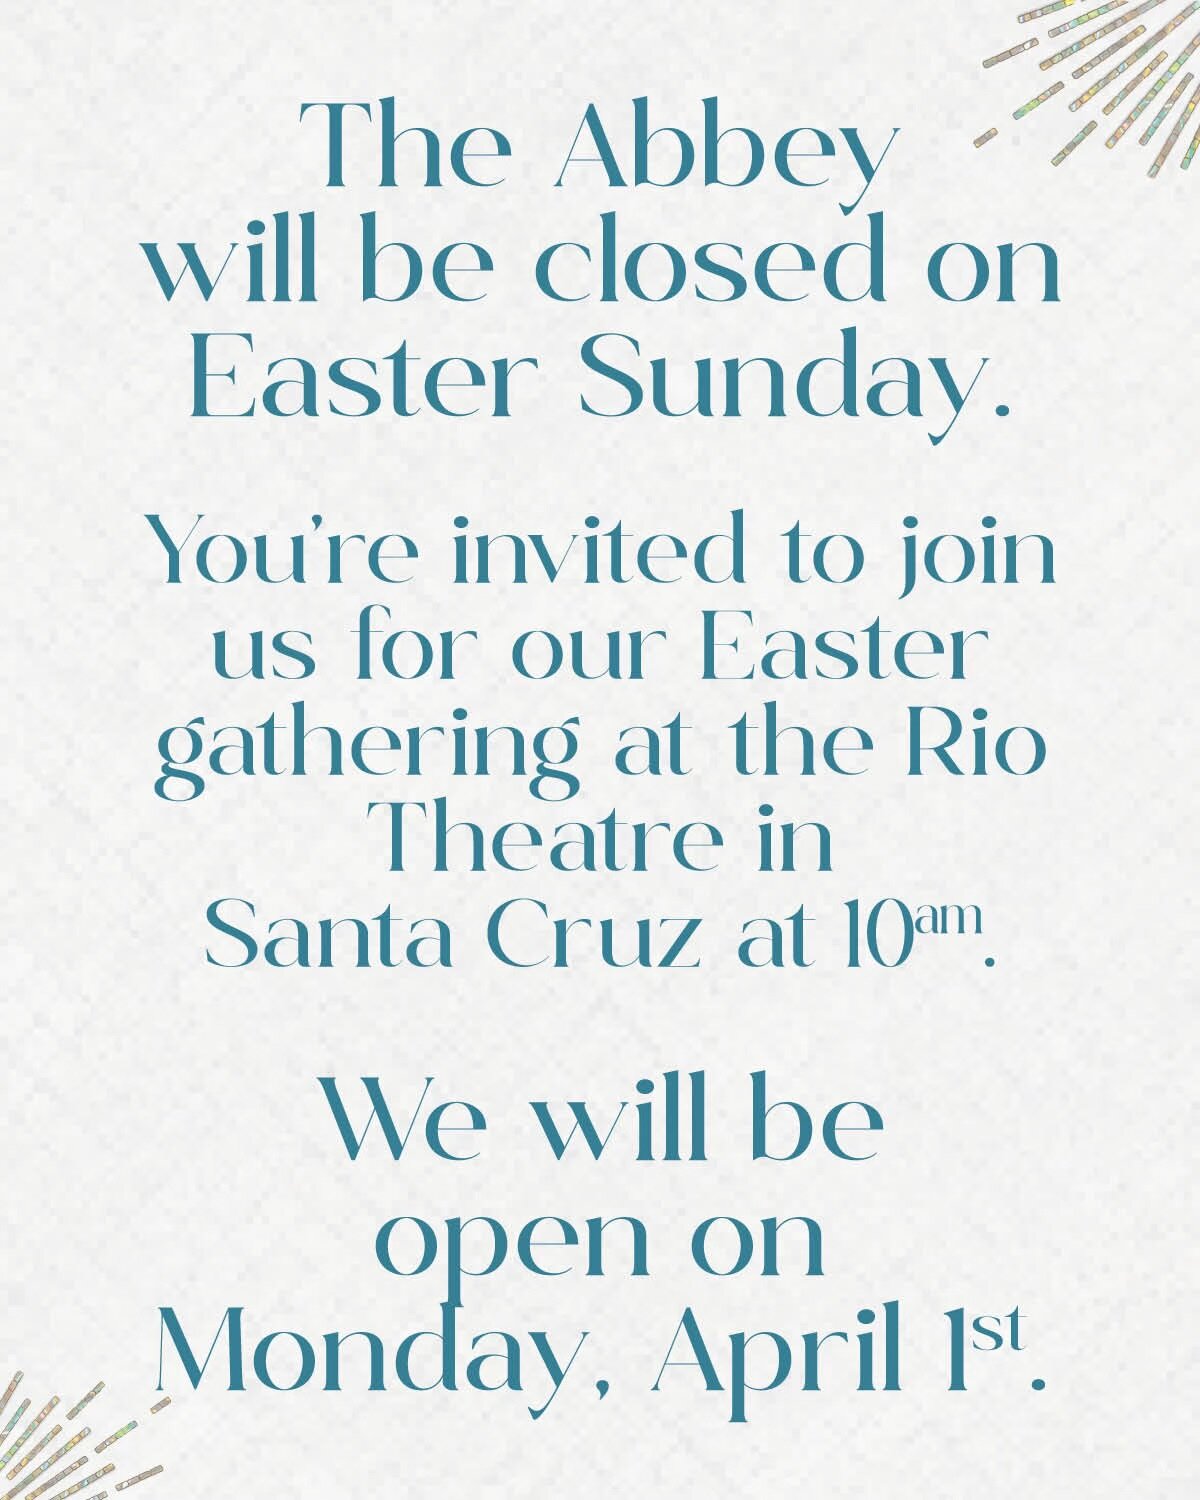 Hello Friends! Happy Easter- we are closed today, Please come celebrate at The Rio Theater at 10AM!!
#theabbeysc